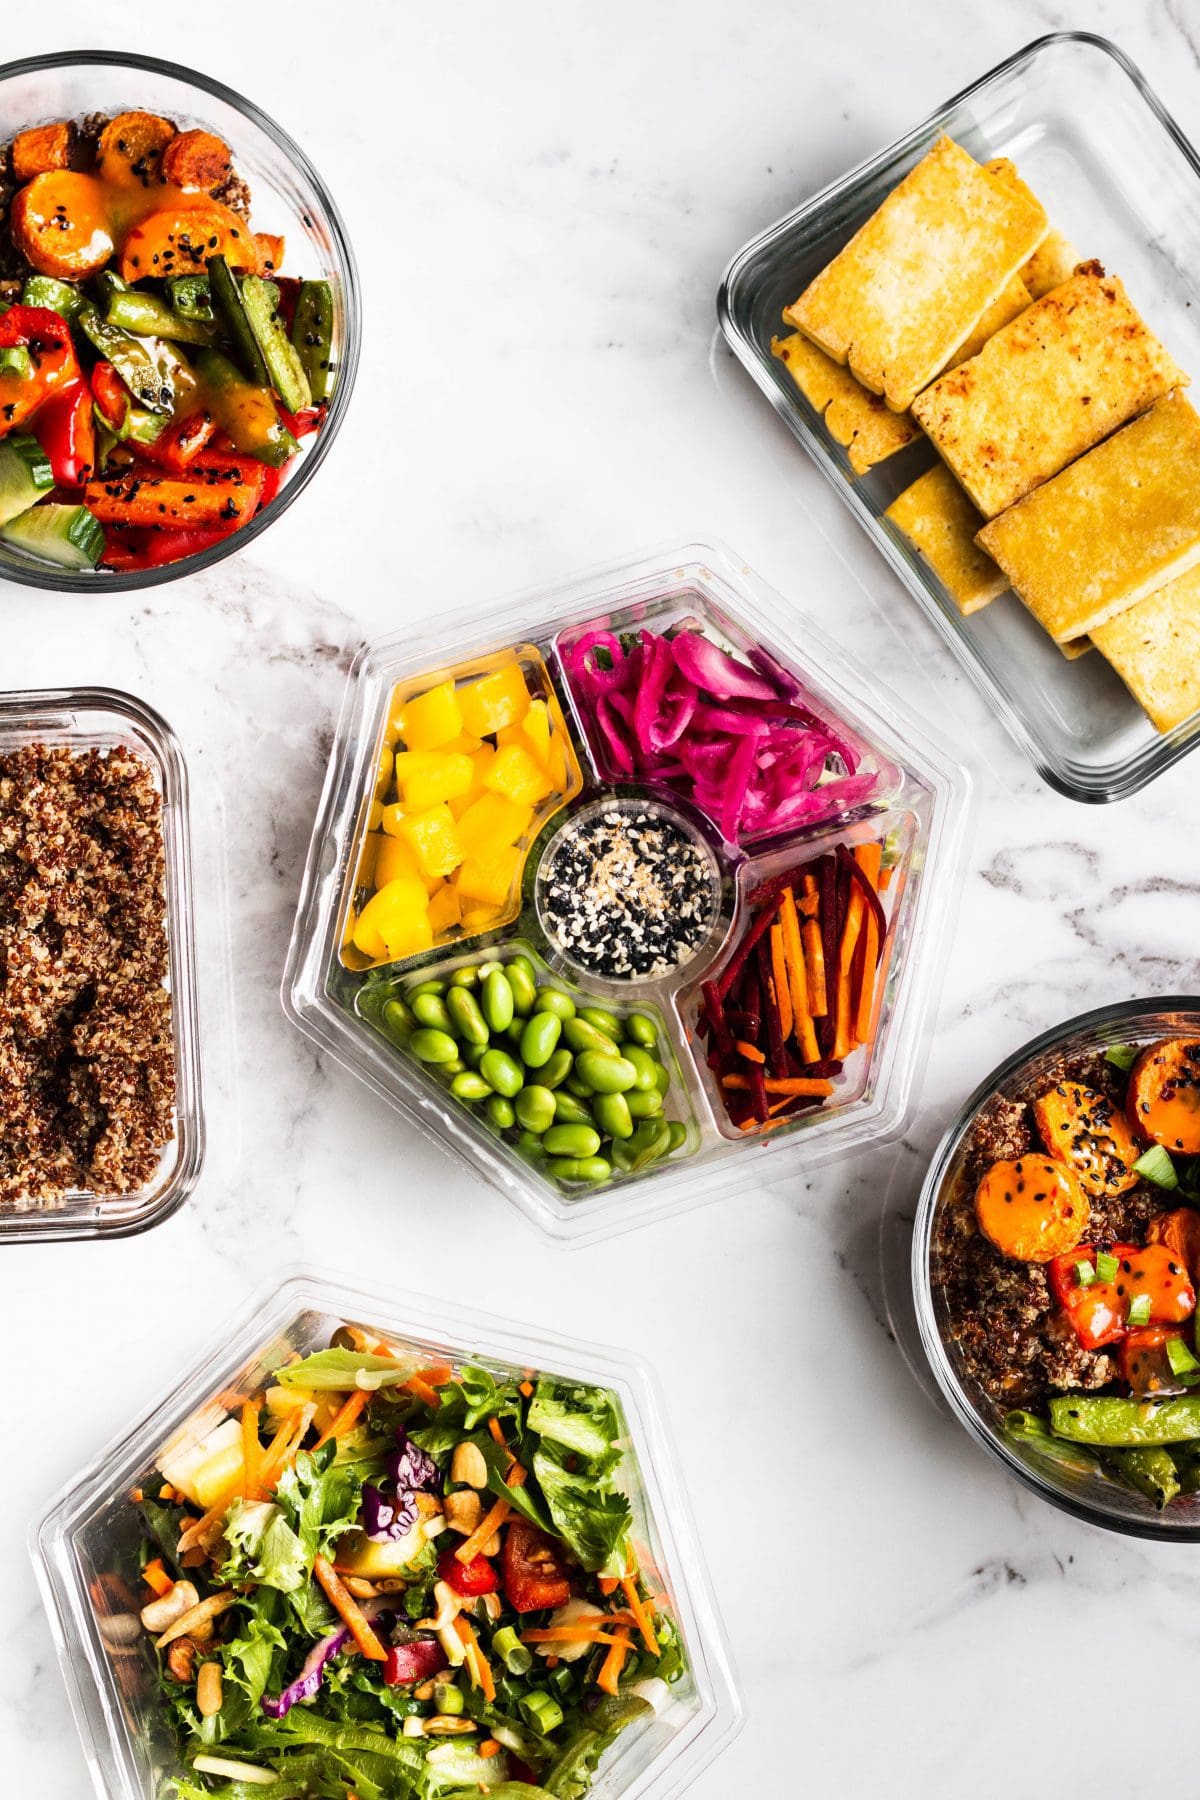 A Registered Dietitian’s Tips To Make Meal Prep Easier